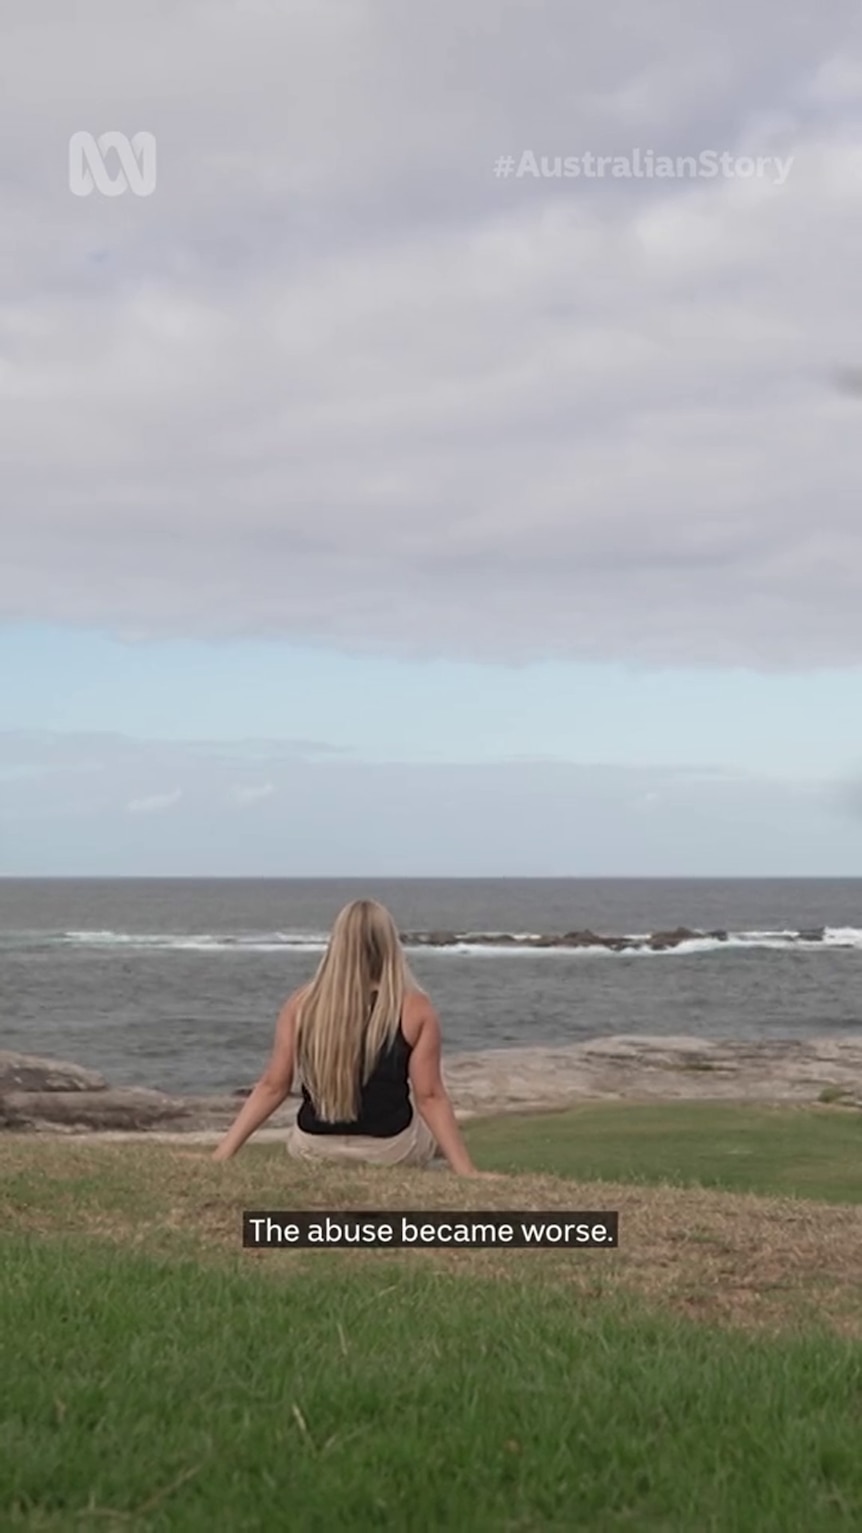 A young woman with blond hair looks out to the ocean as she sits on the grass